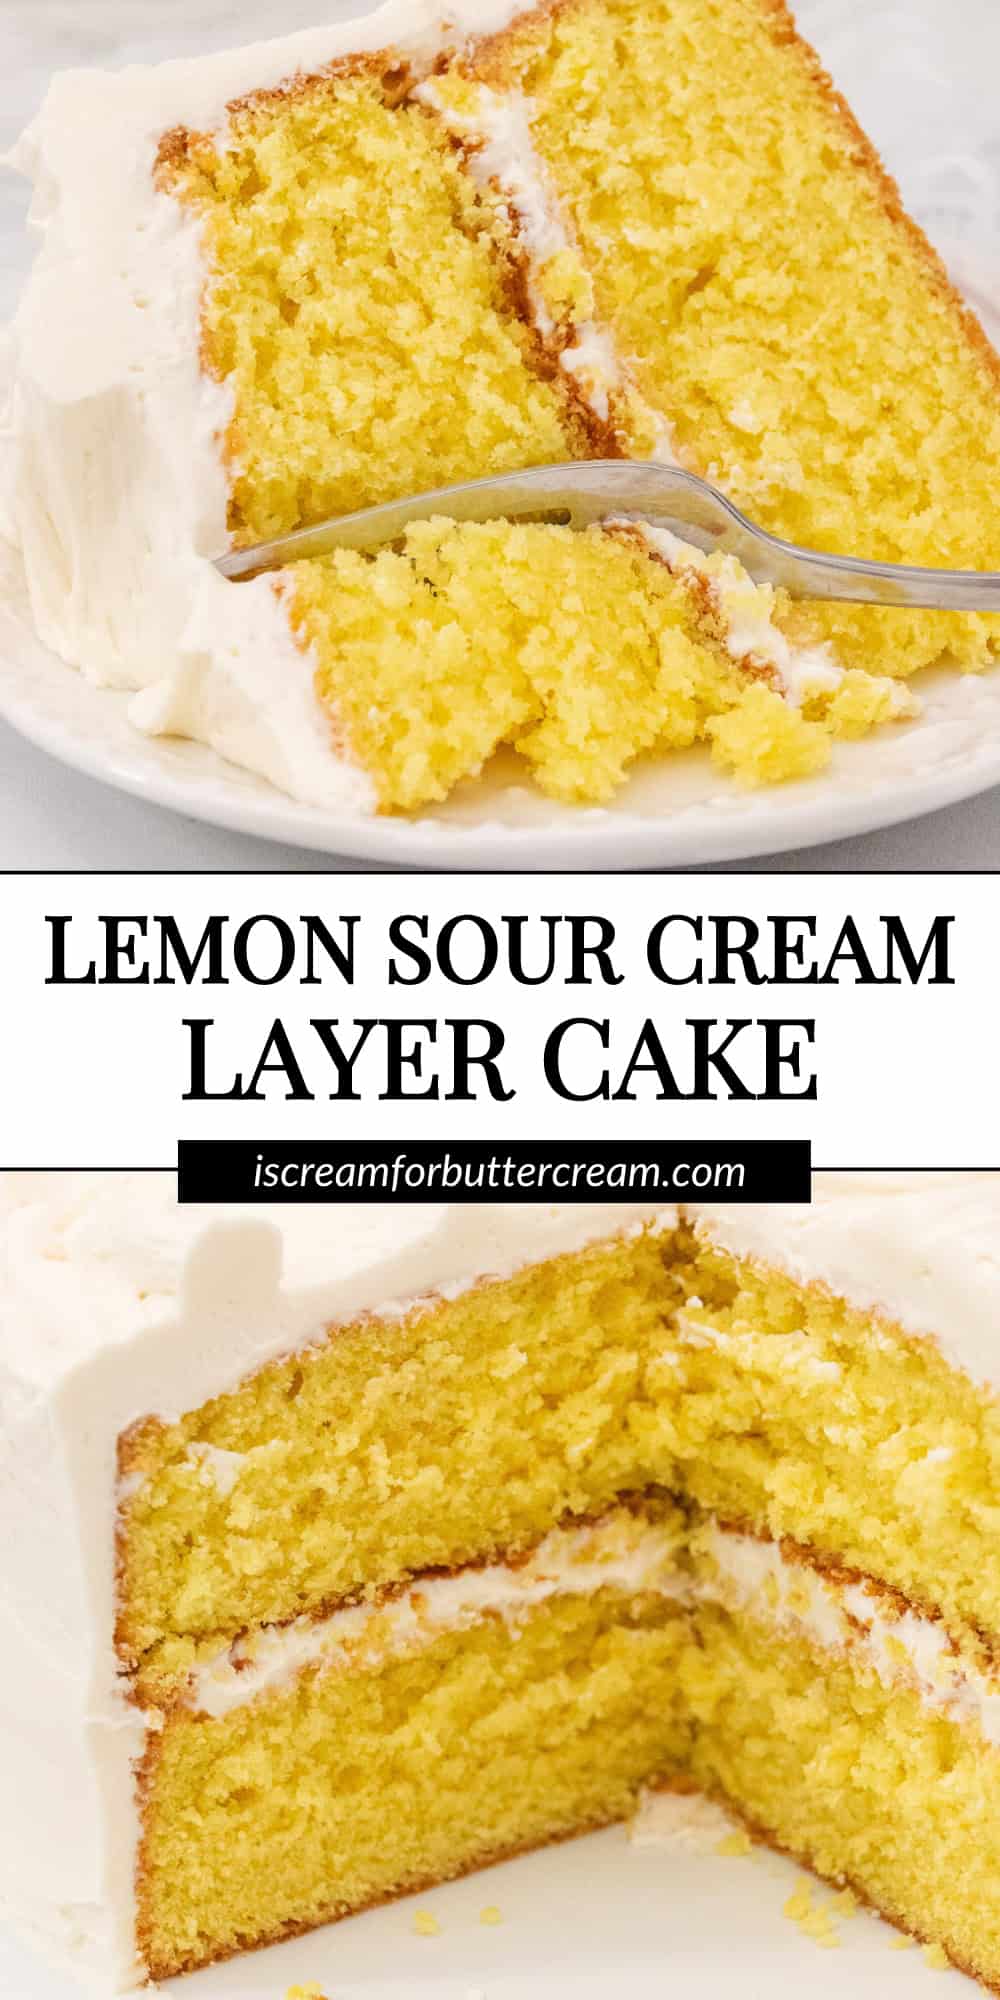 Pinterest graphic image with two images, the top is a large slice of lemon layer cake with a fork and the bottom image is the full cake with slices cut out on a white platter.